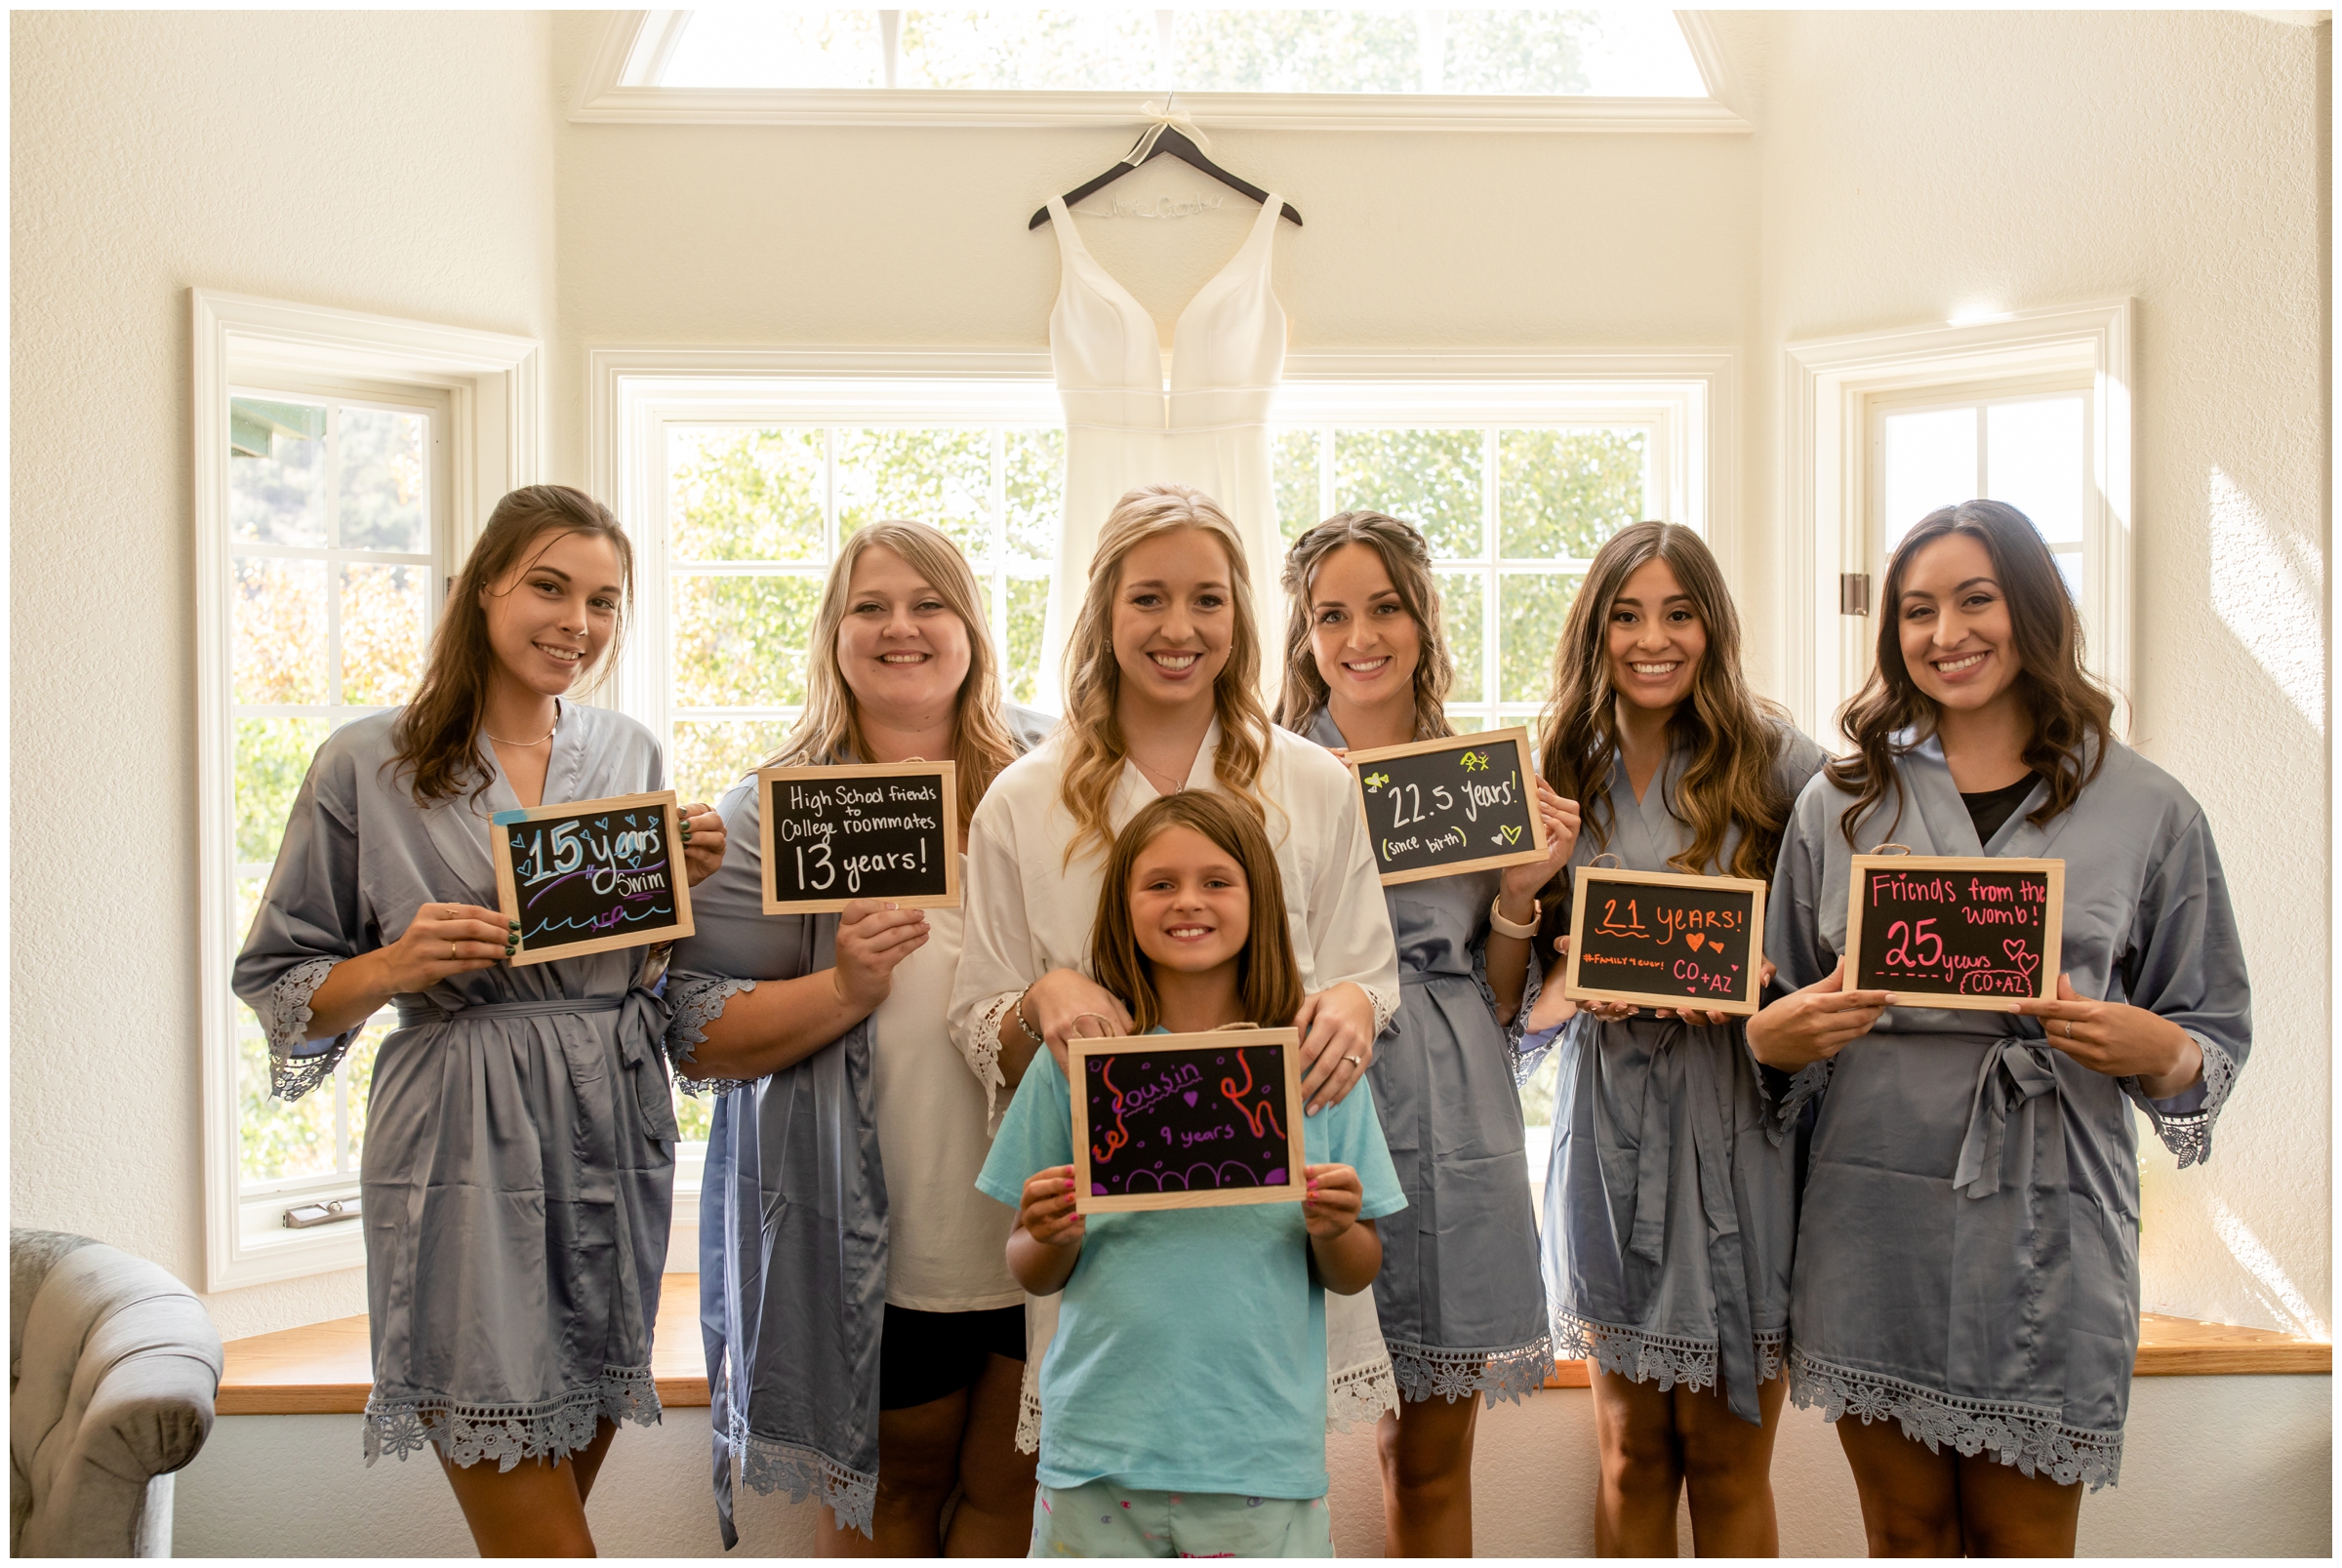 bridesmaids holding signs indicating how they know the bride